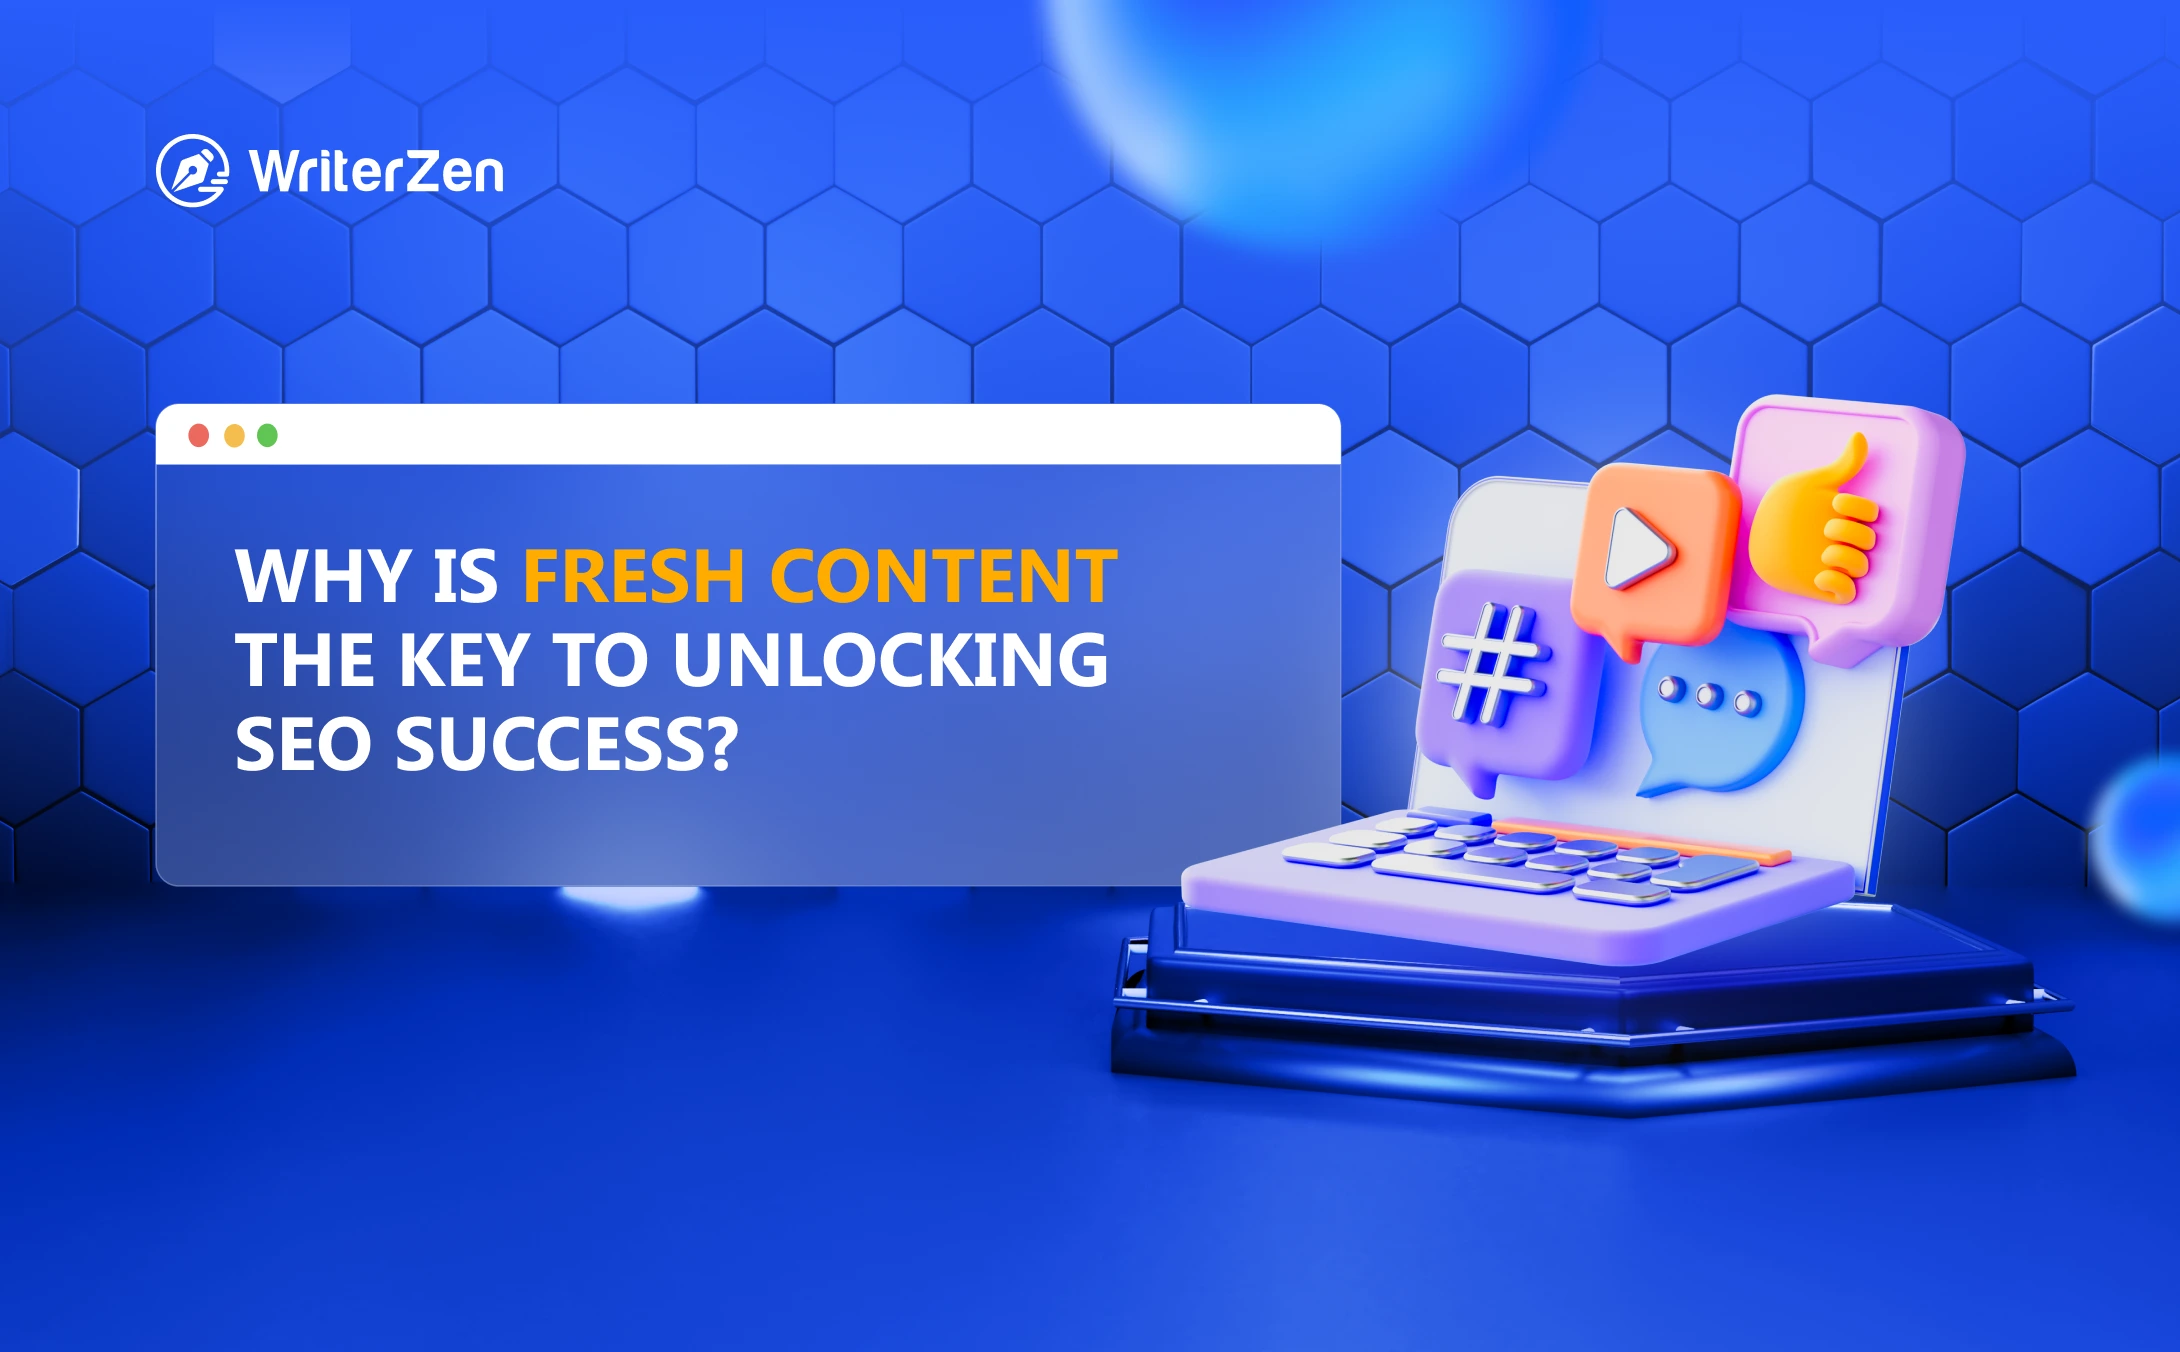 Why Is Fresh Content the Key to Unlocking SEO Success?